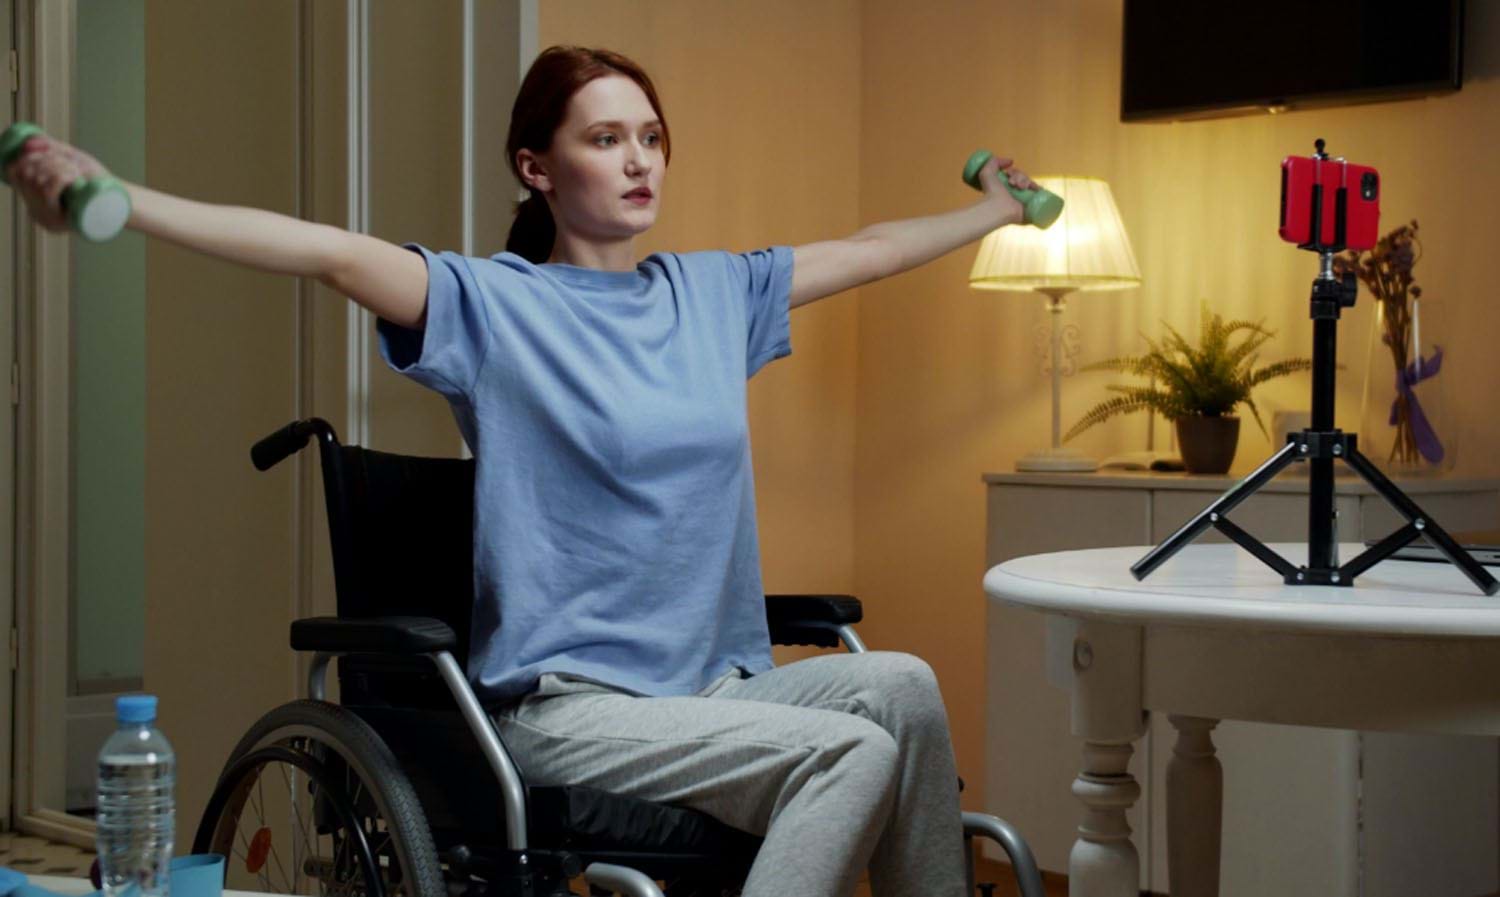 Lady in wheelchair with arms outstretched